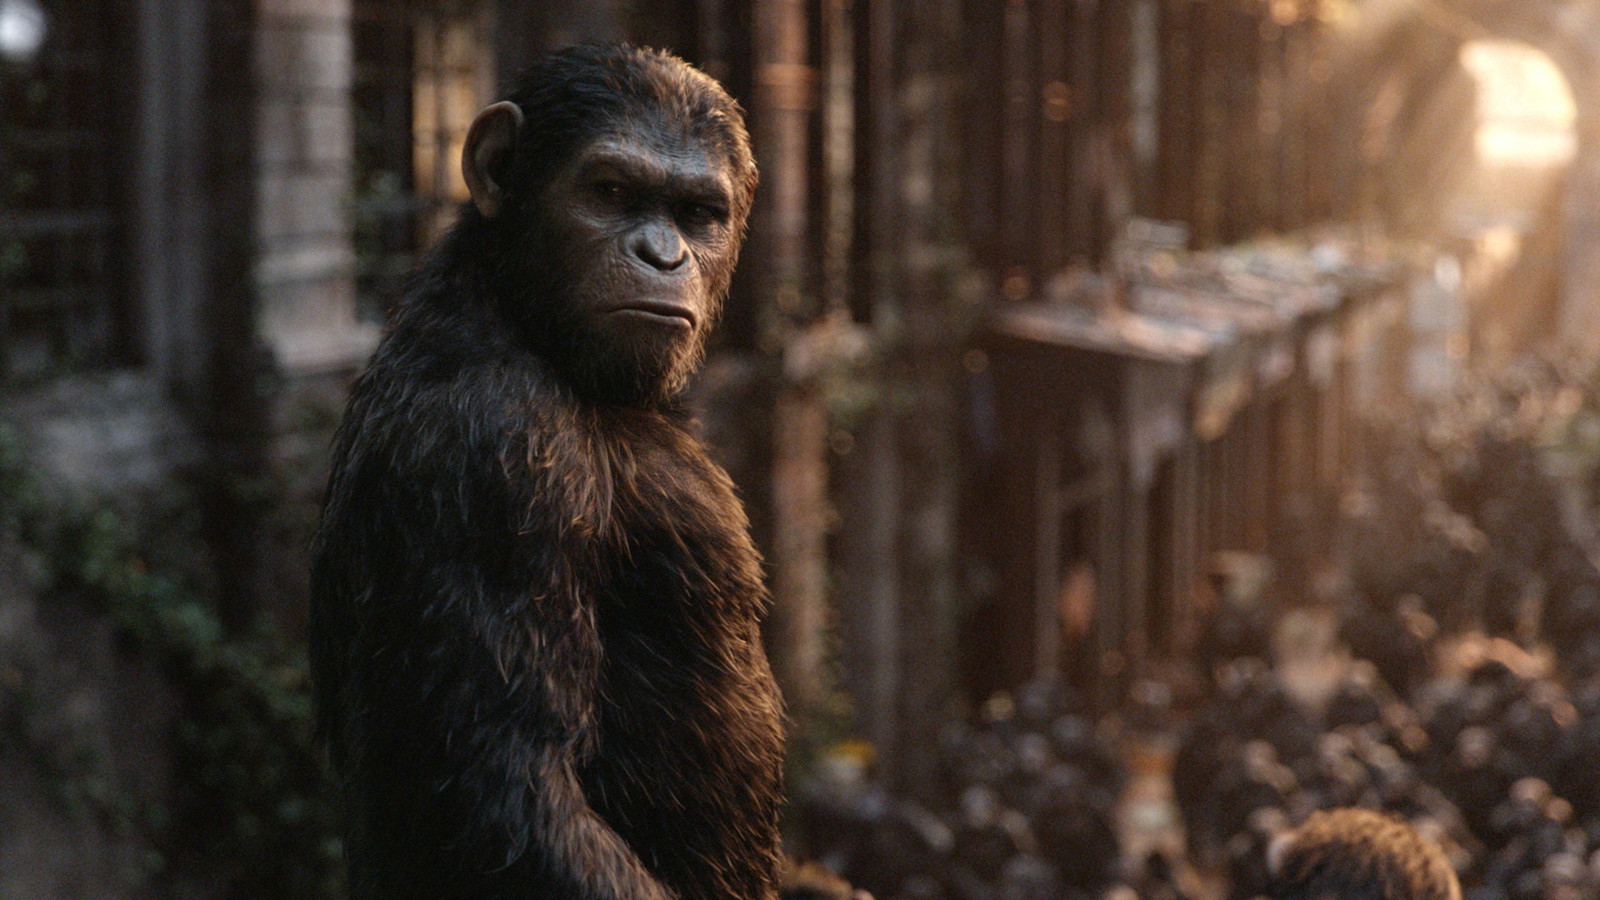 Matt Reeves suggested some radical changes for Dawn of the Planet of the Apes when he took over the film